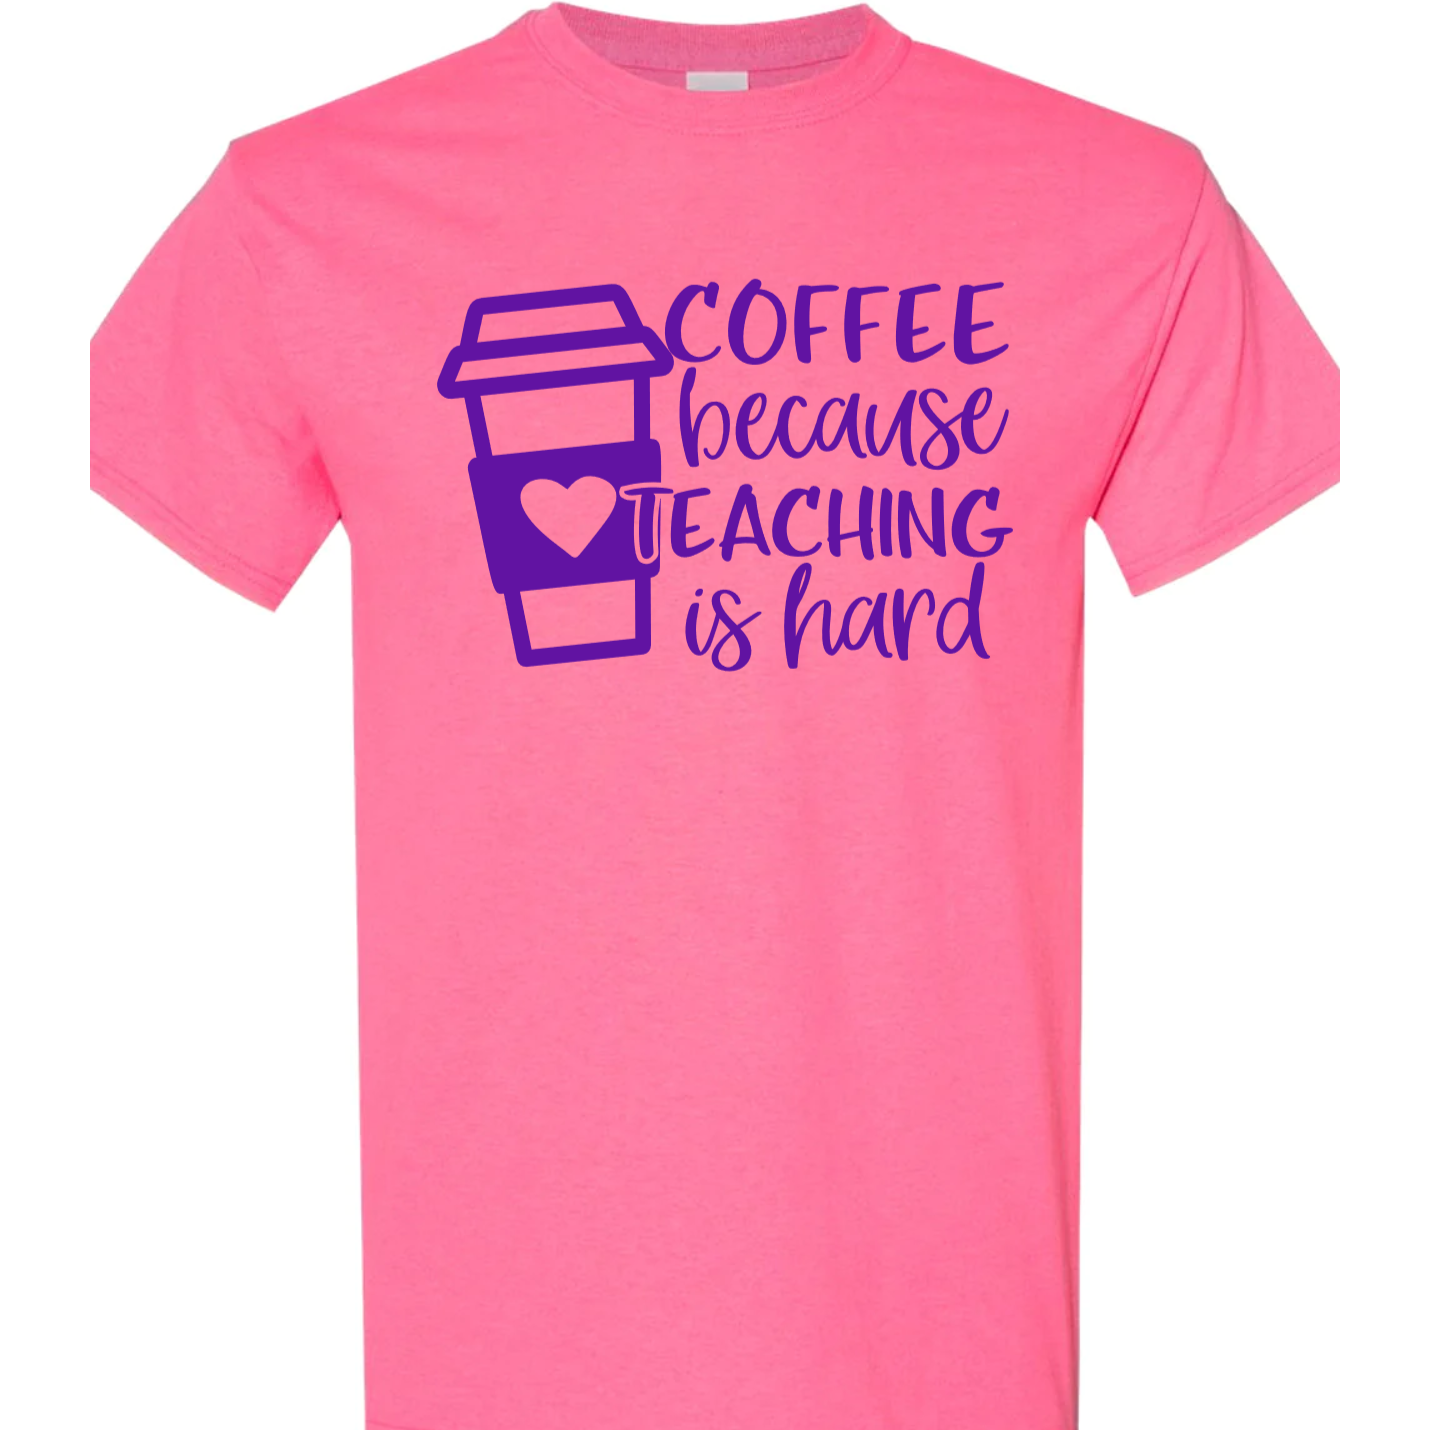 Coffee Because Teaching is Hard Vinyl Graphic for Shirts